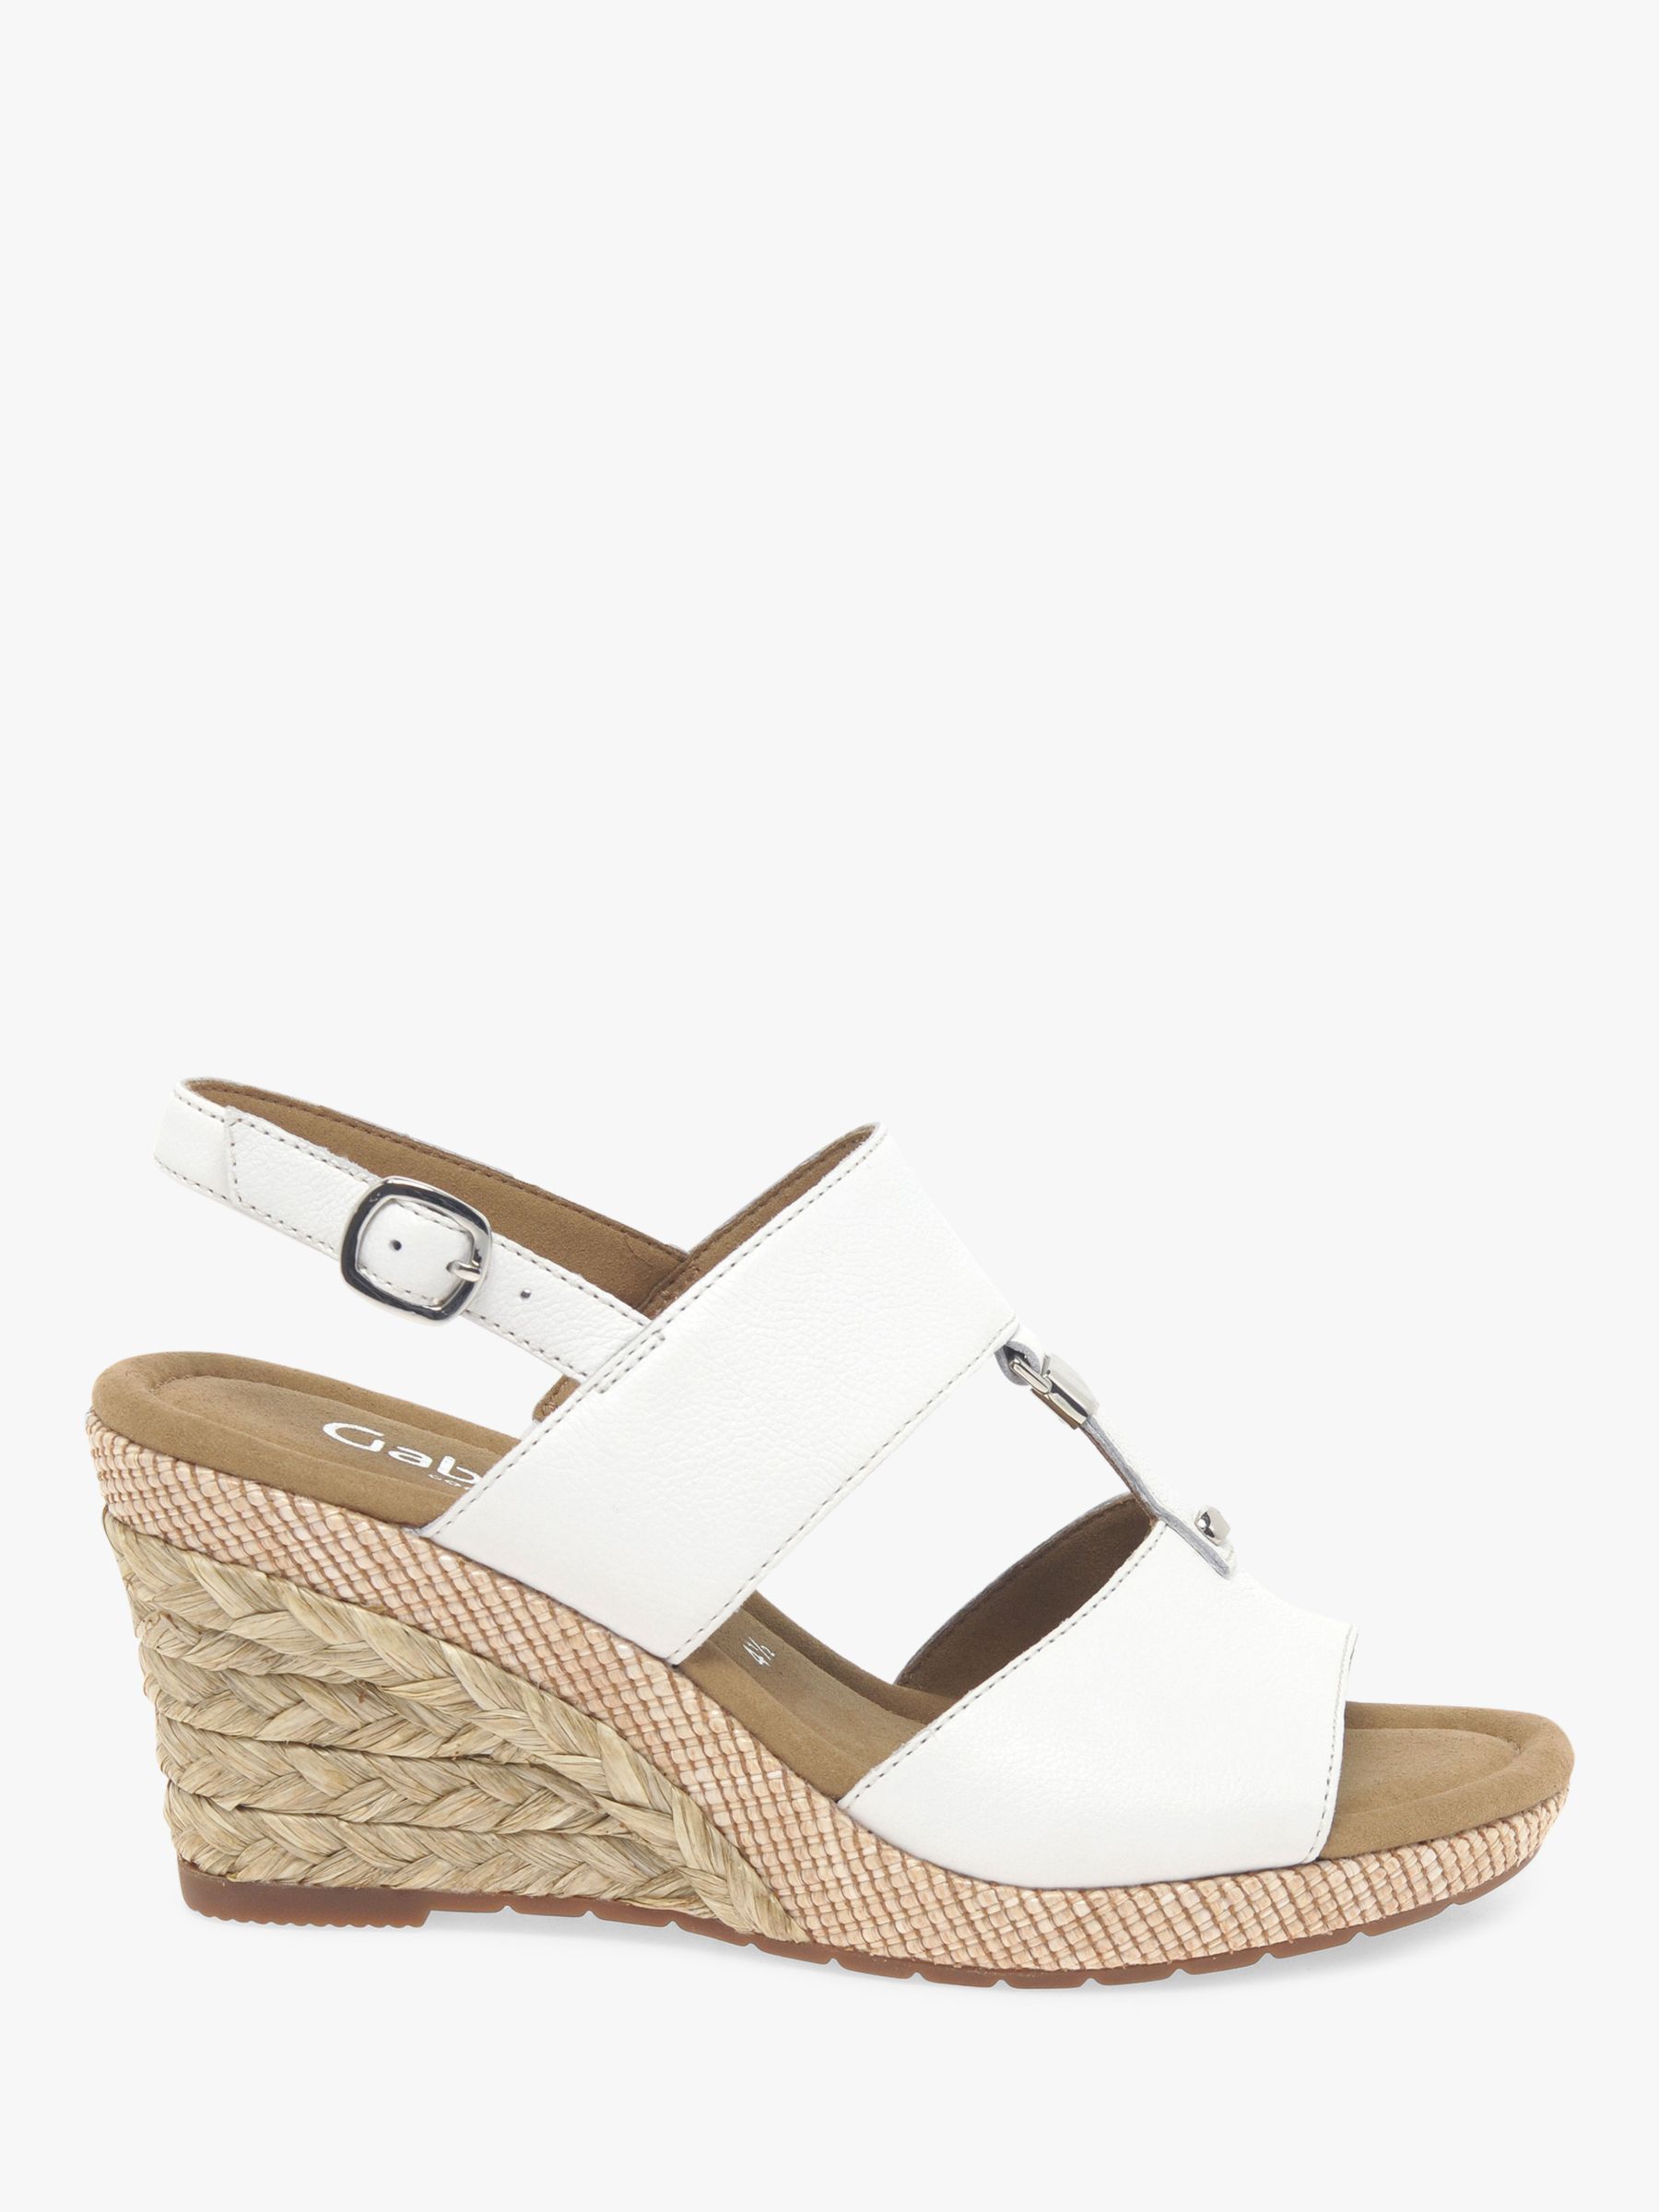 wide fit wedge trainers